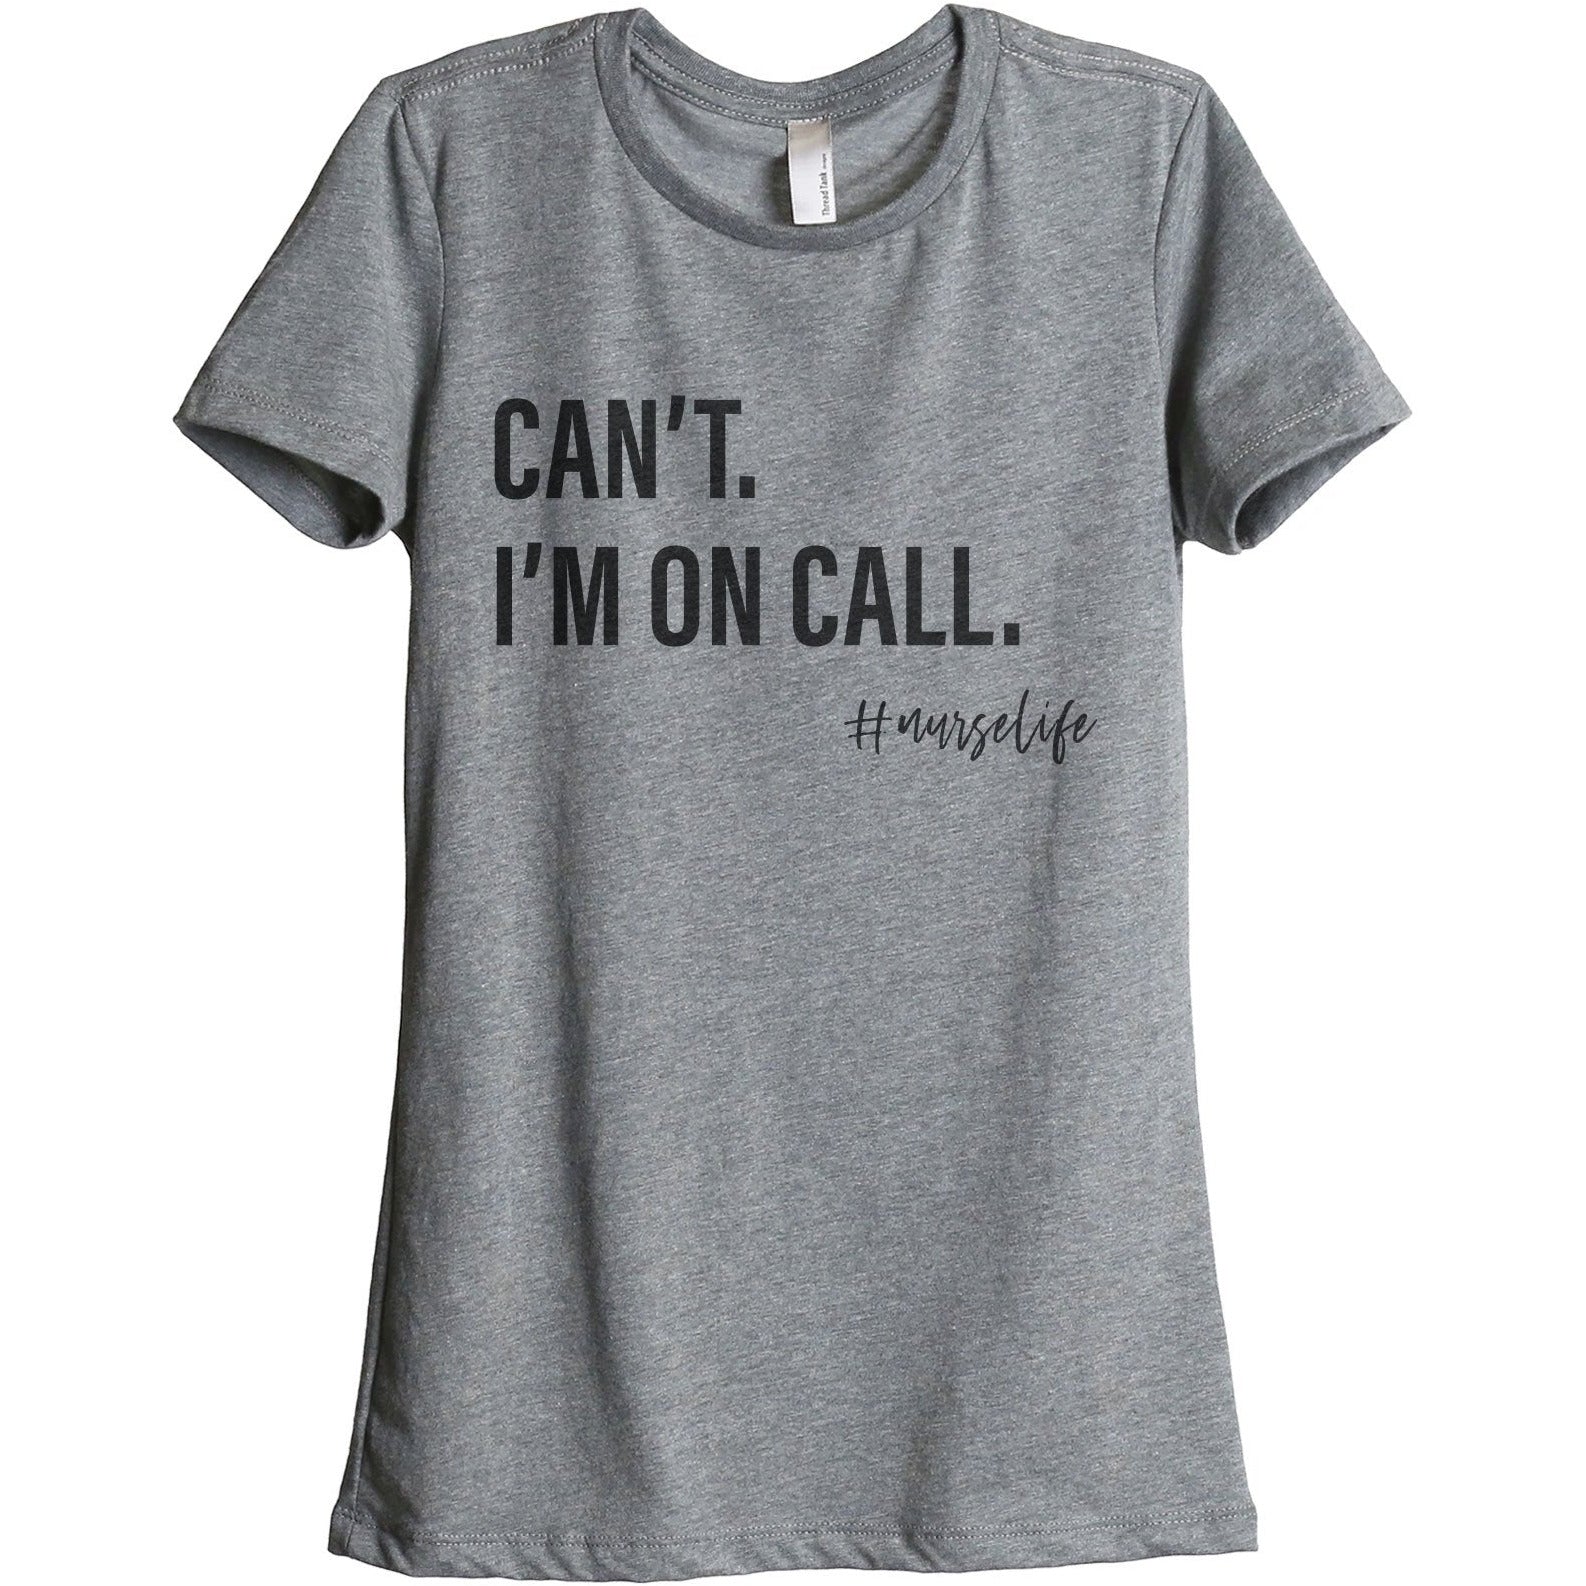 Can't I'm On Call Nurse Life Women's Relaxed Crewneck T-Shirt Top Tee Heather Grey